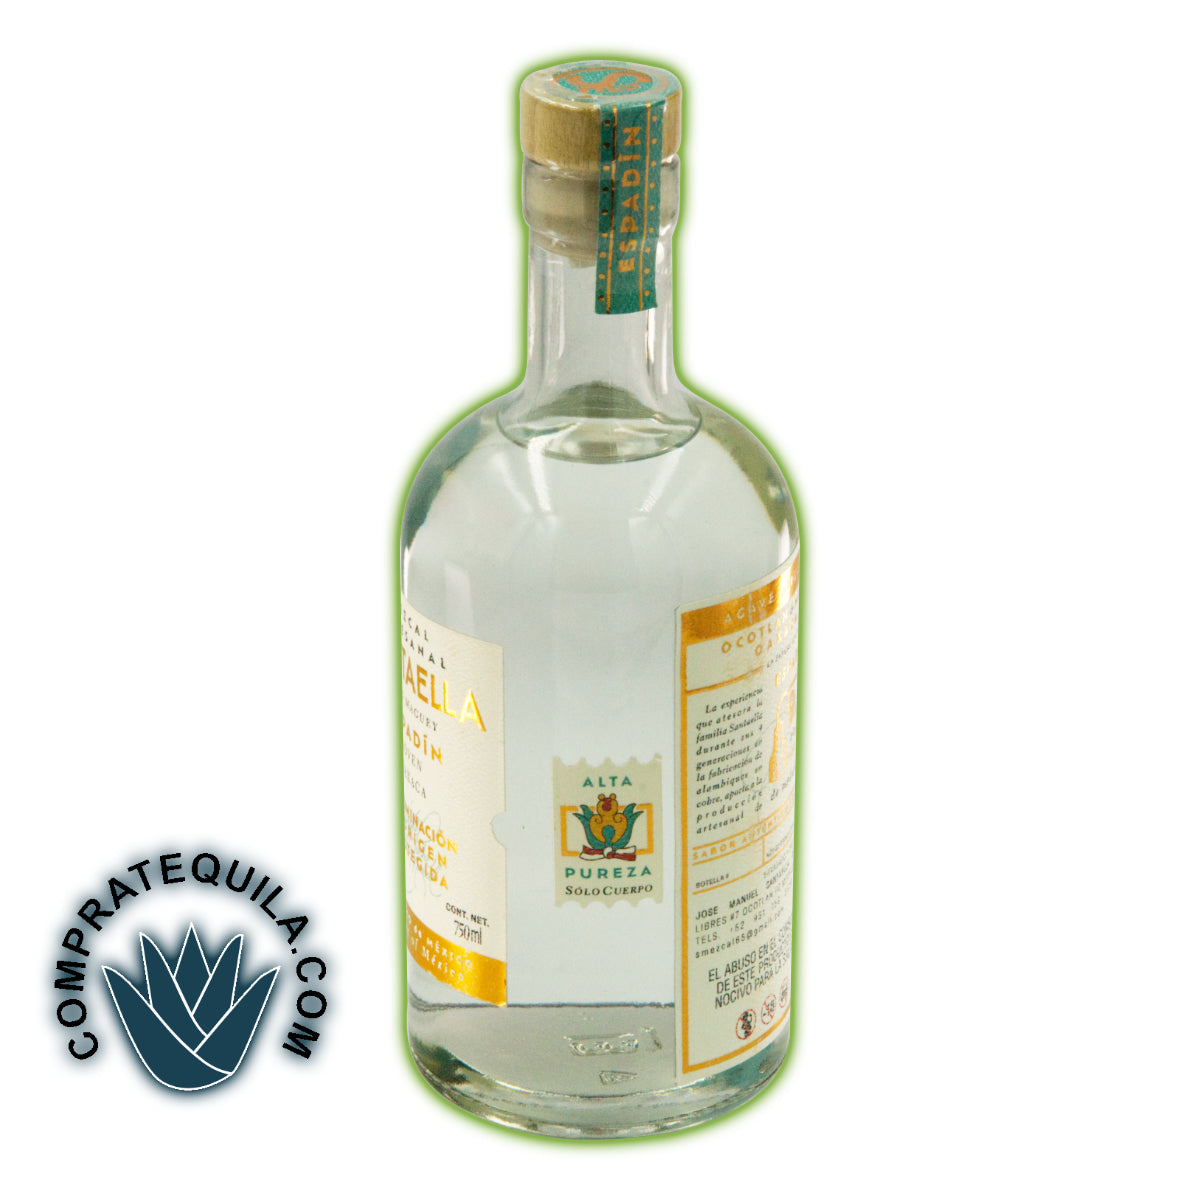 Mezcal Santaella: Discover the Artisanal Excellence of Oaxaca in Every Drop